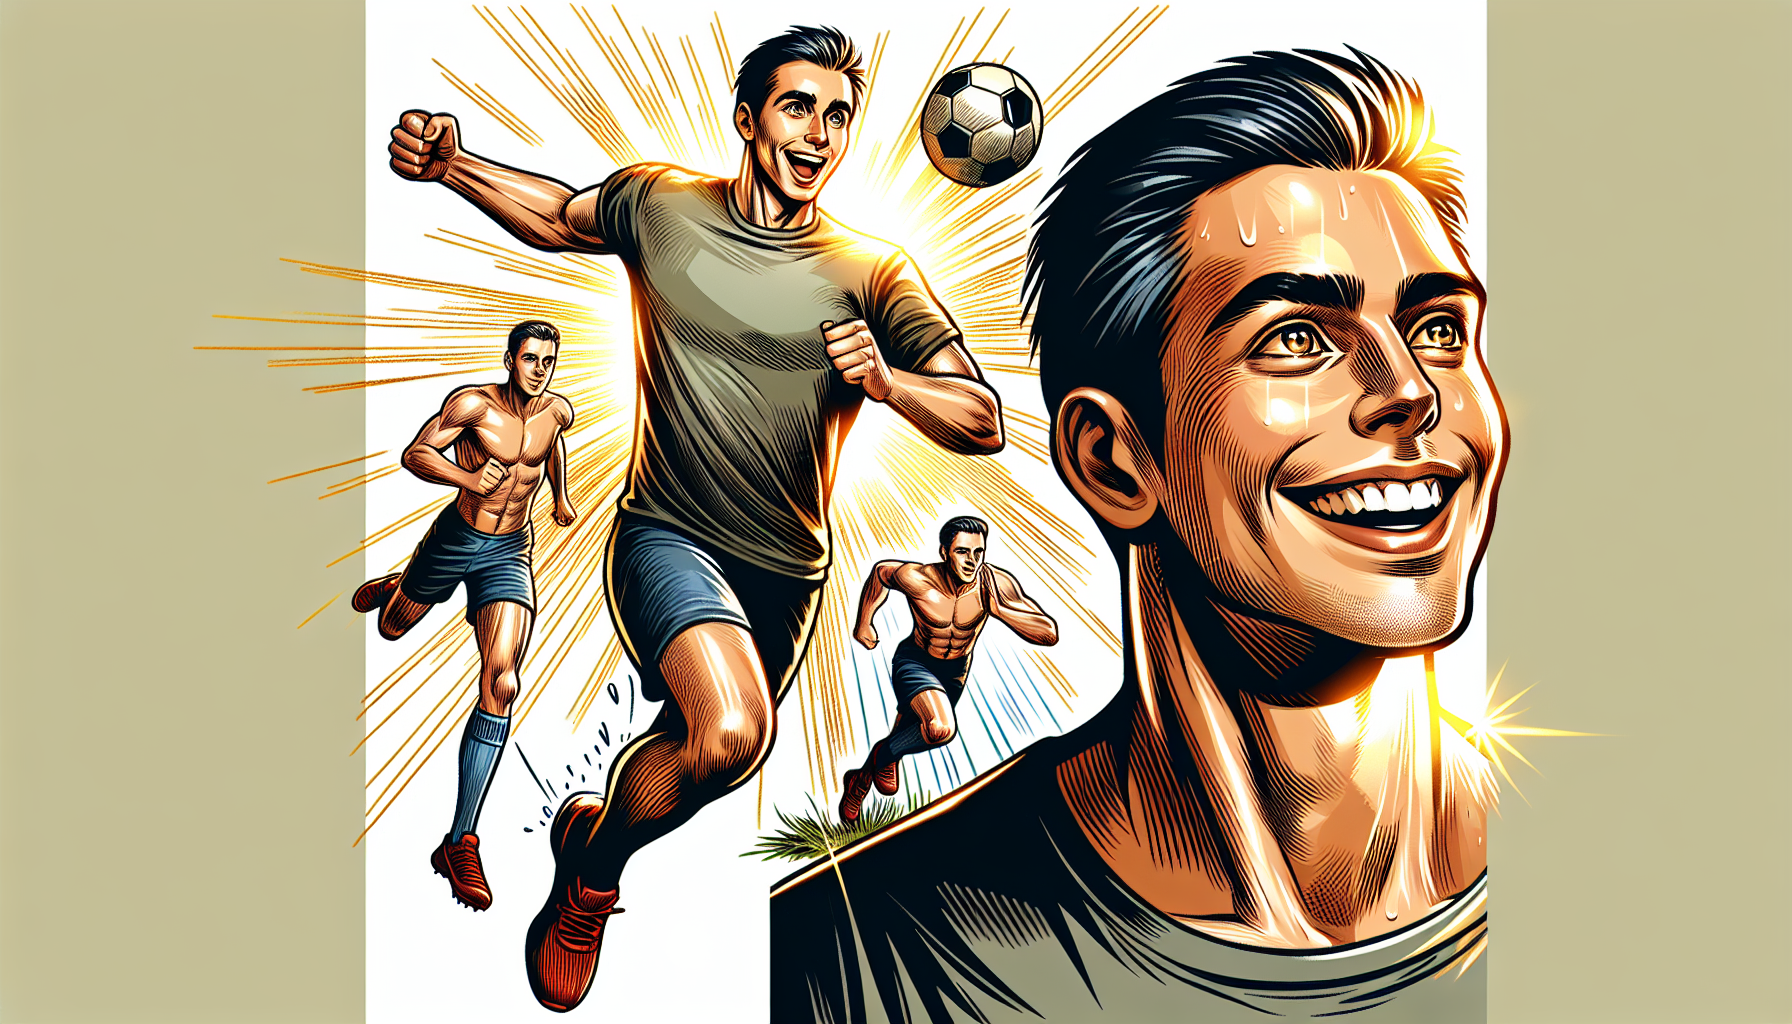 Illustration of a man feeling energetic and active